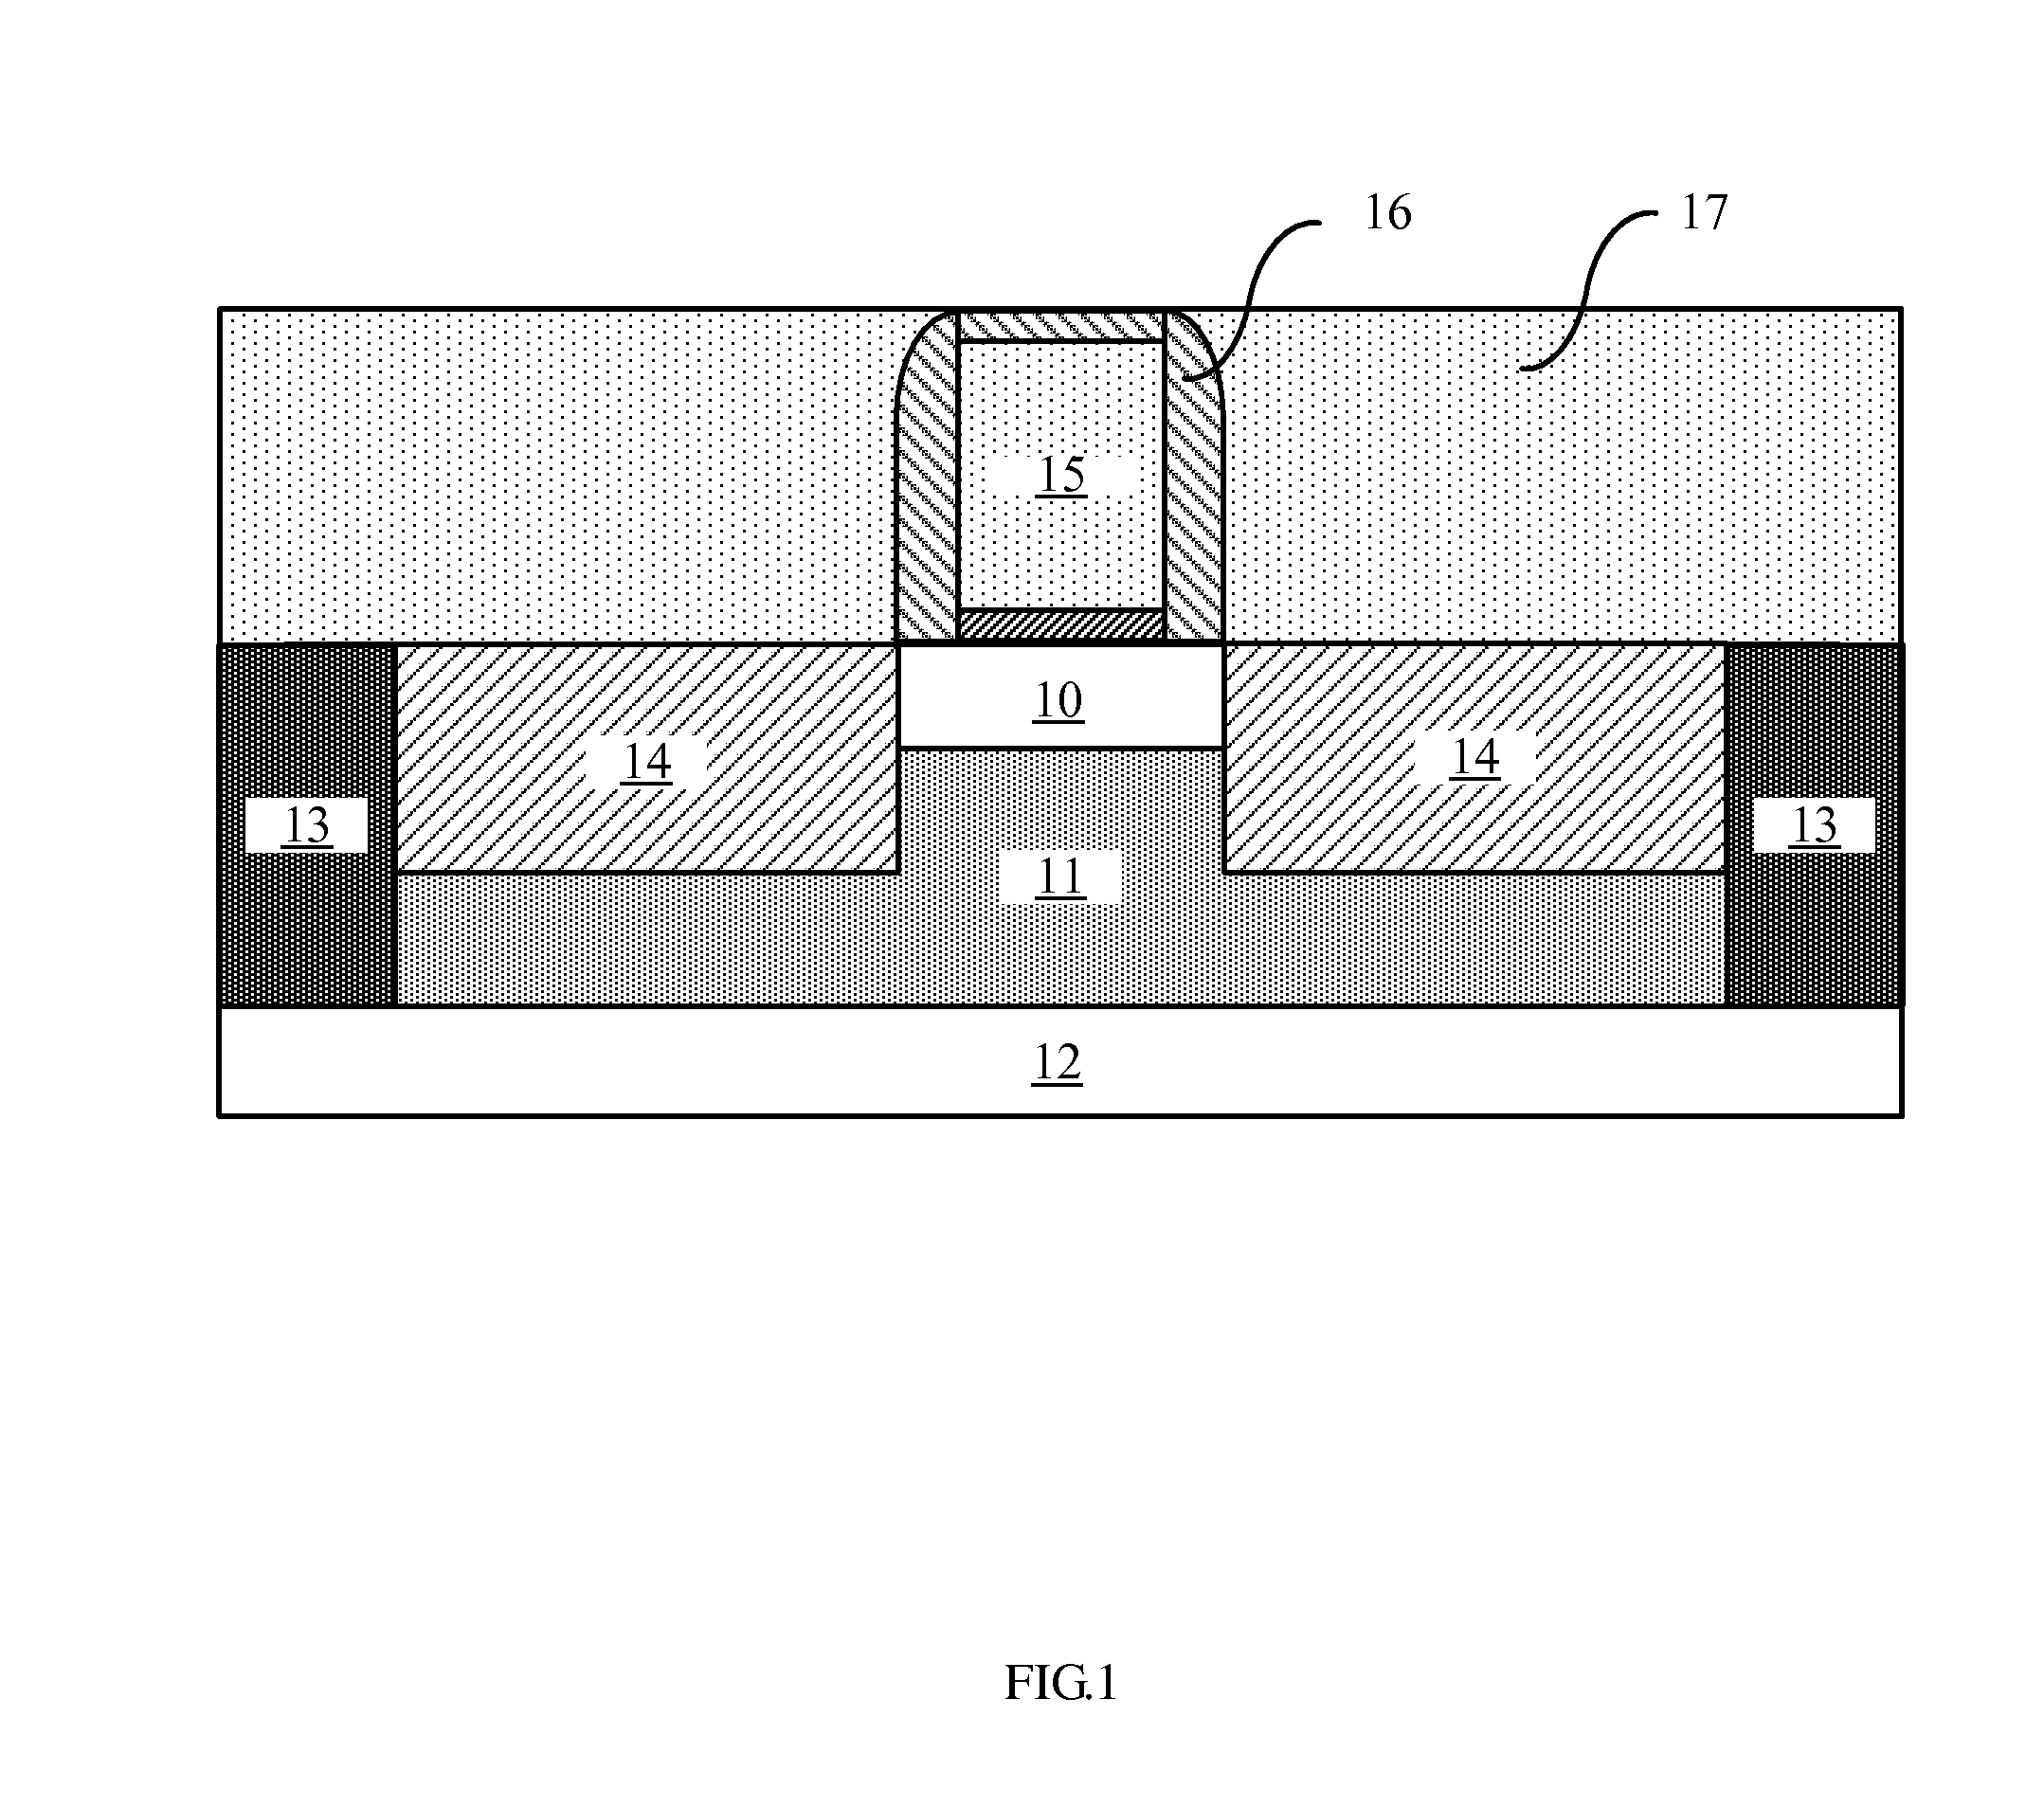 Method for manufacturing a semiconductor structure